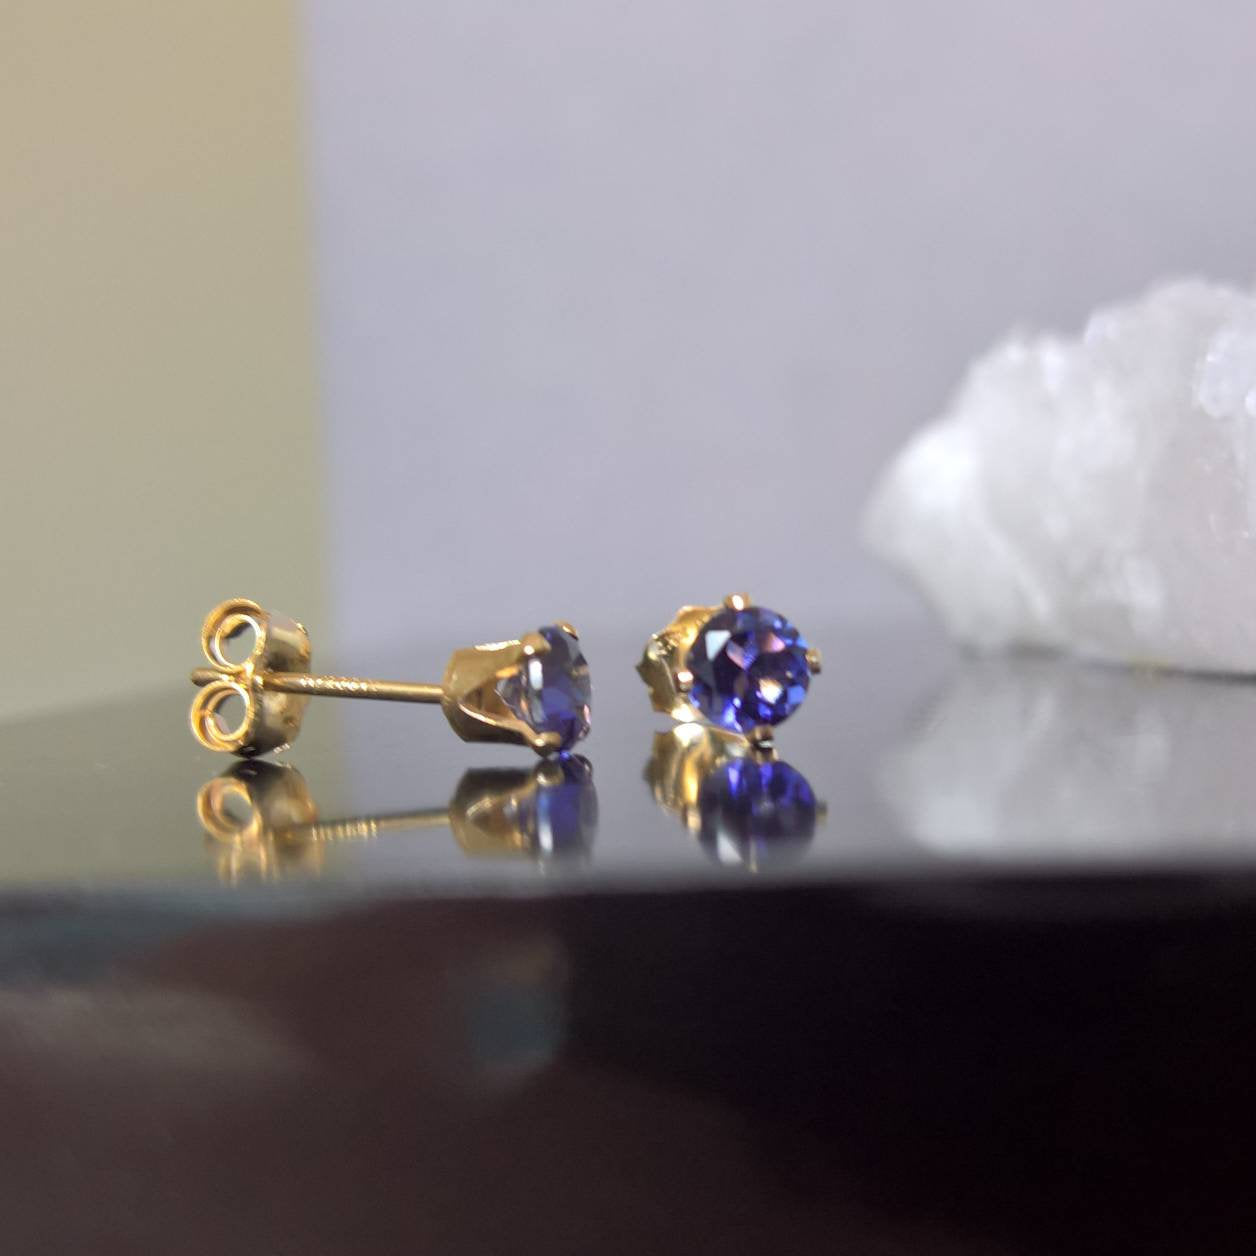 Iolite earrings stud - sterling silver or gold fill 4mm size